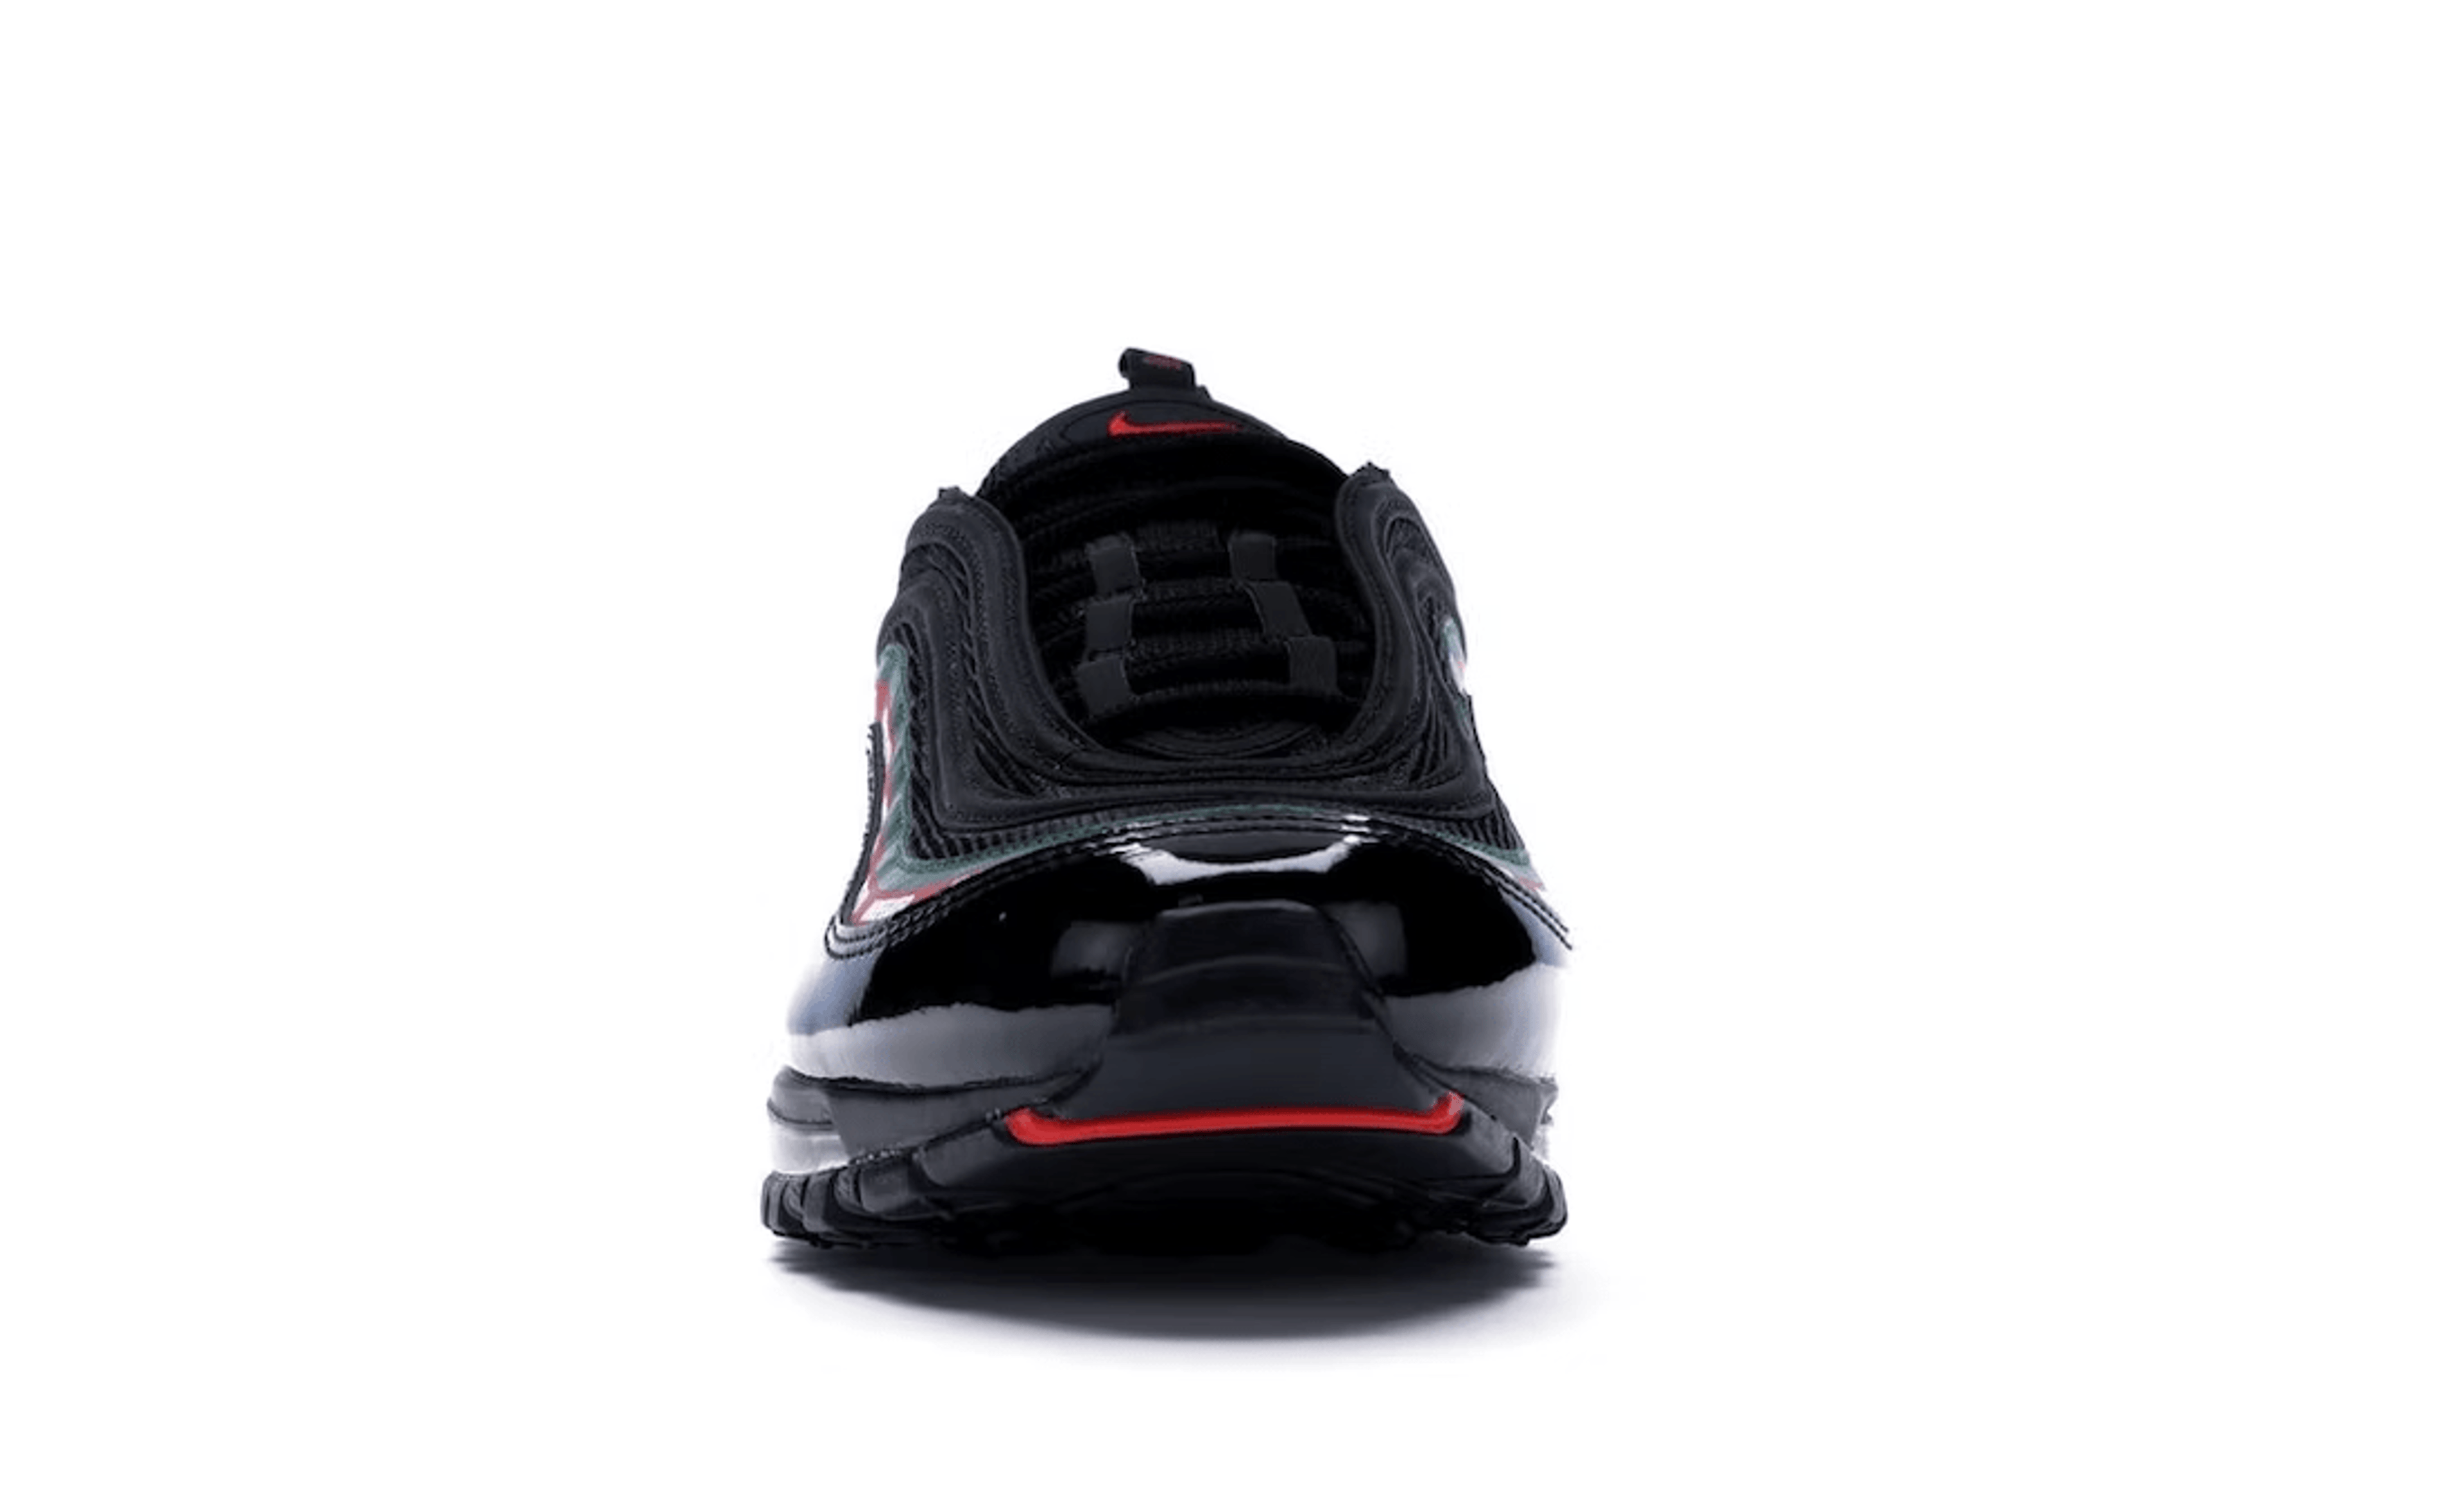 Alternate View 2 of Nike Air Max 97 Undefeated Black